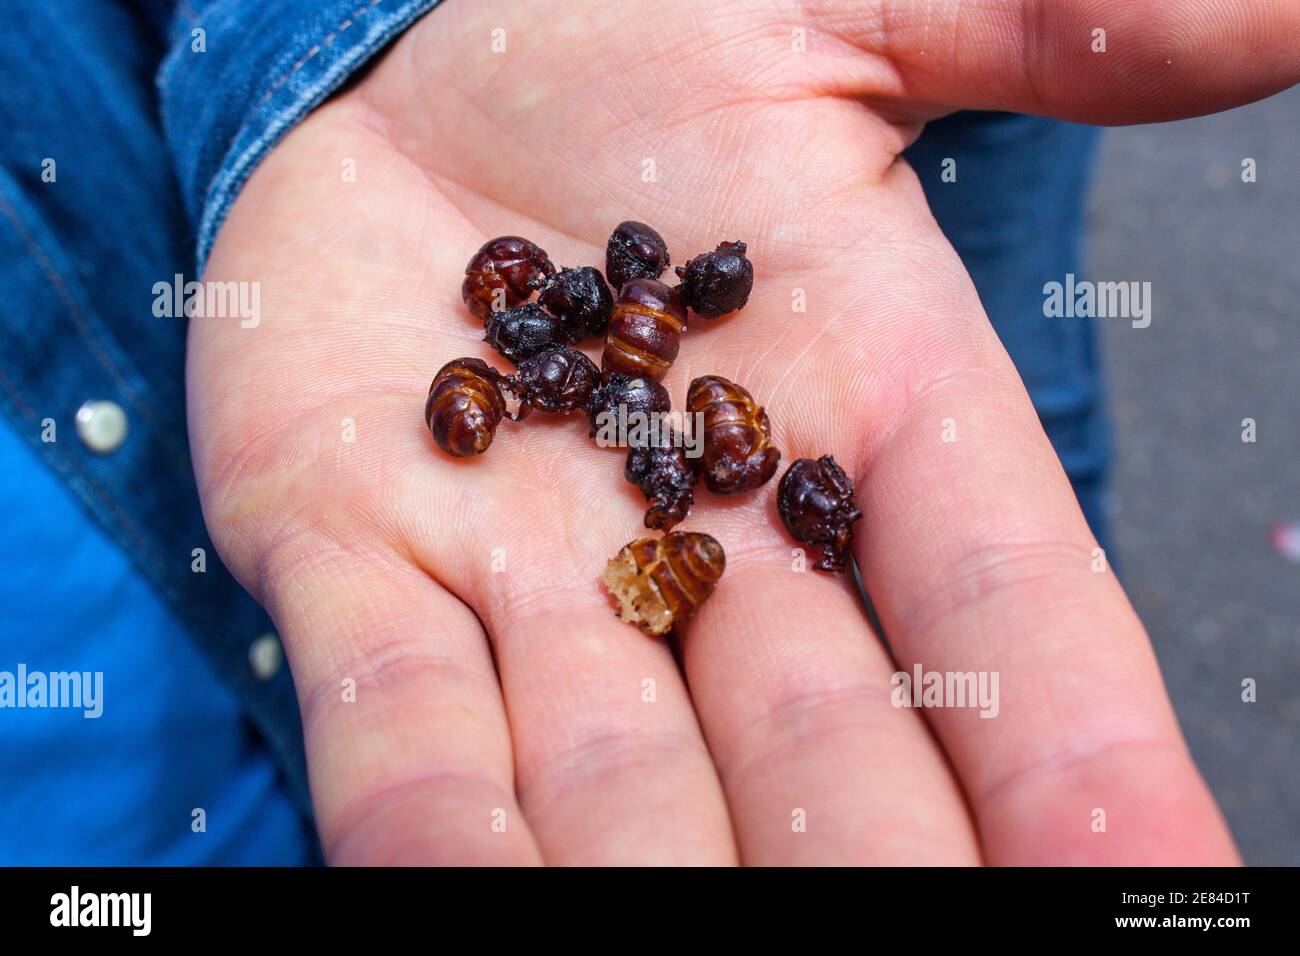 Big Fot High Resolution Stock Photography and Images - Alamy